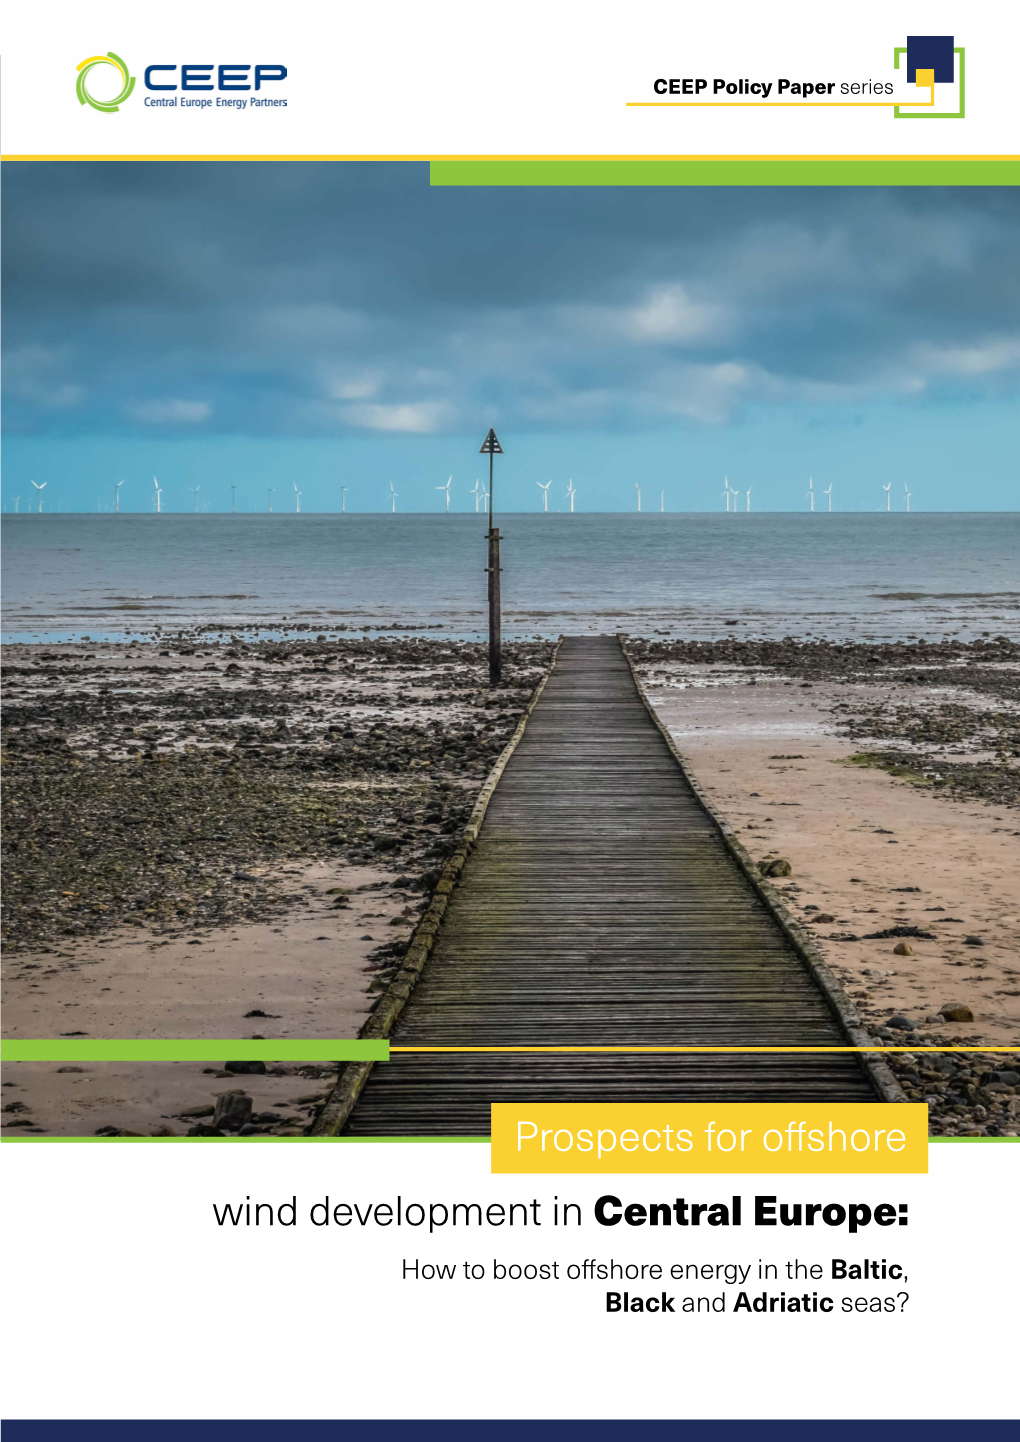 Prospects for Offshore Wind Development in Central Europe: How to Boost Offshore Energy in the Baltic, Black and Adriatic Seas? CEEP POLICY PAPER SERIES